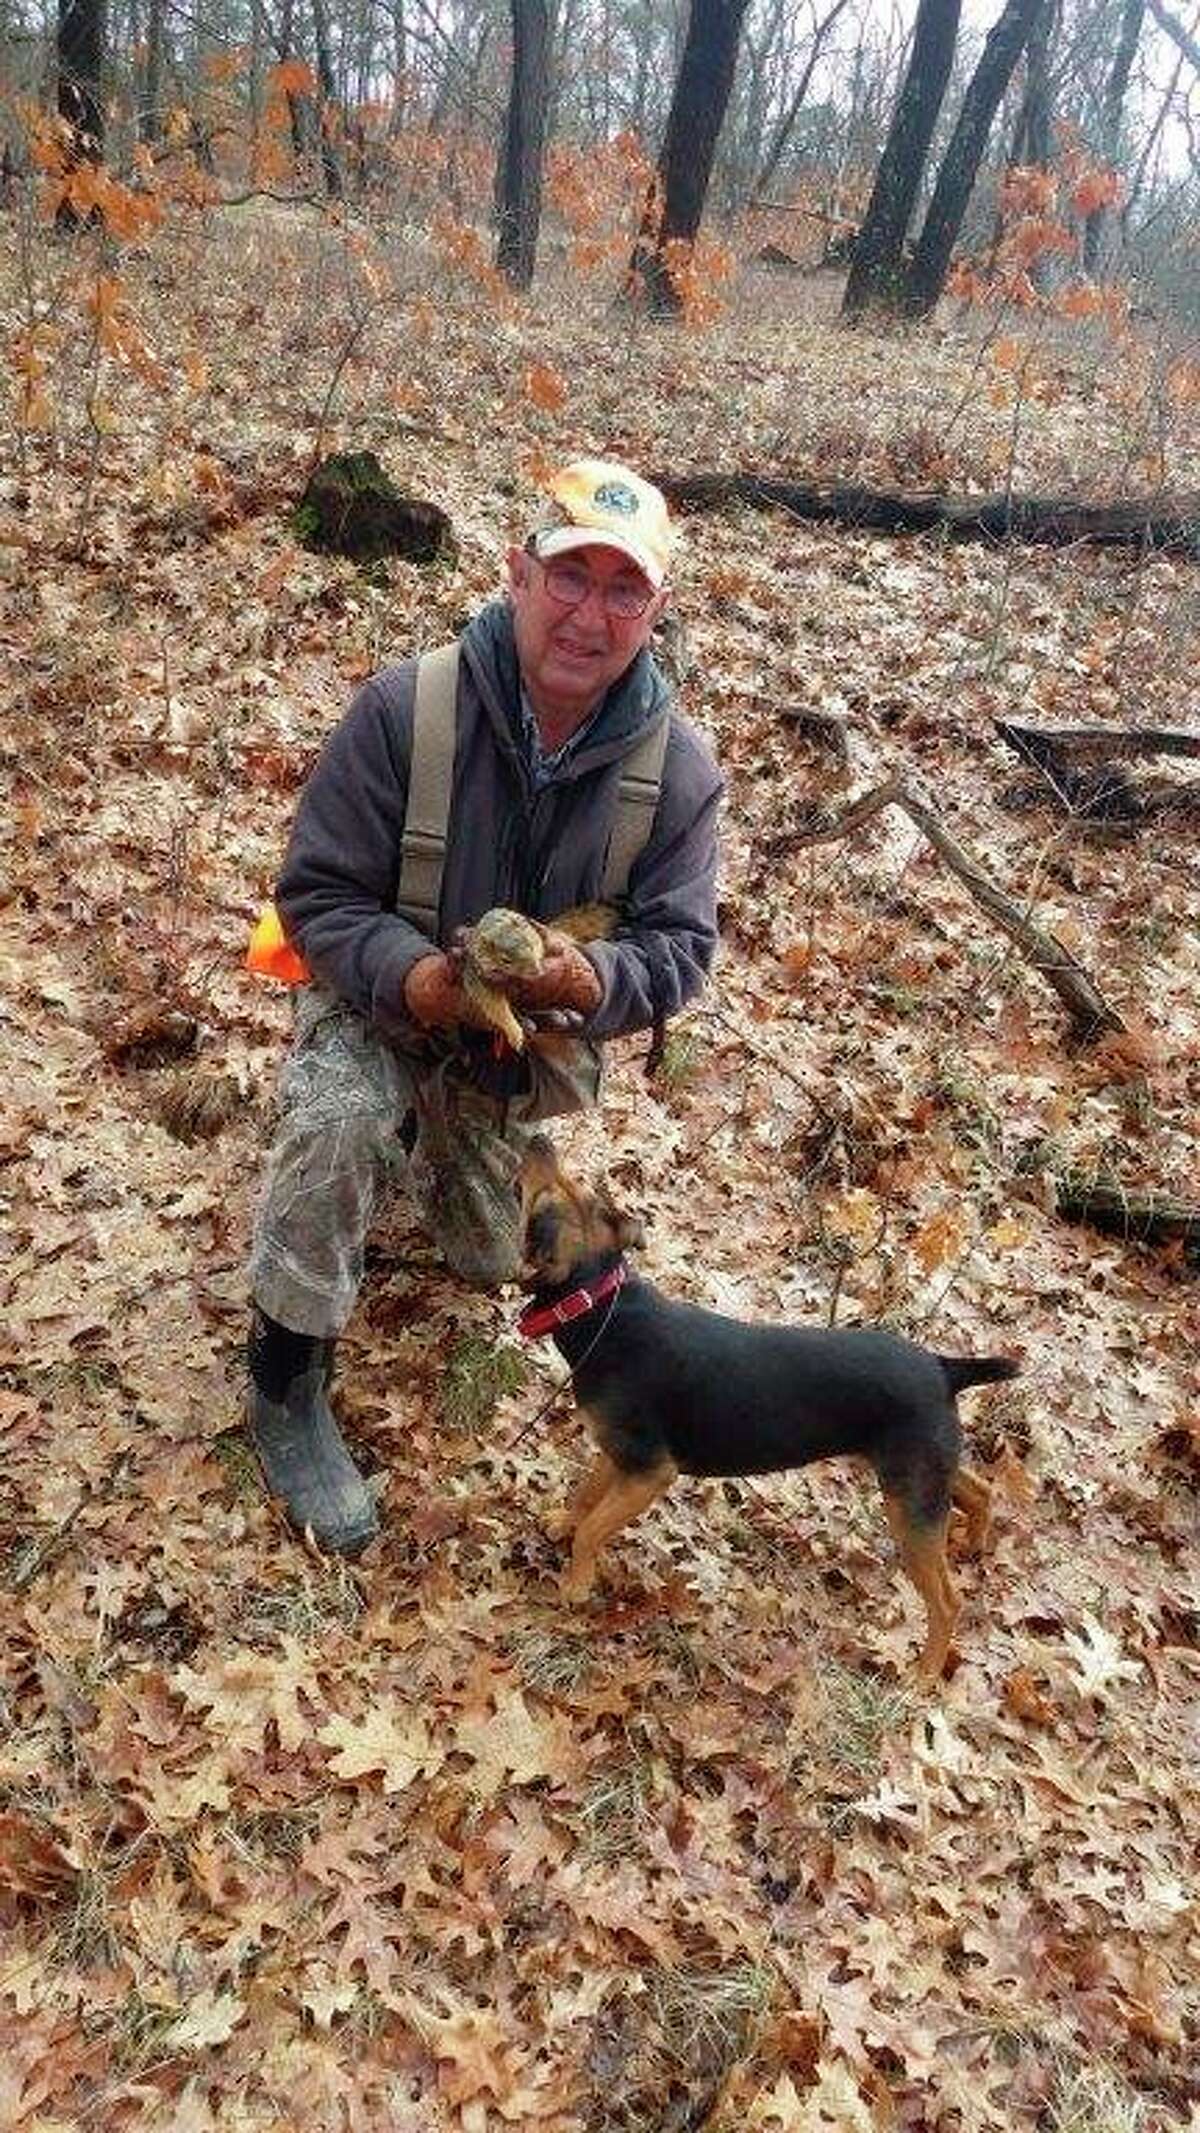 Bill Blohm of Akron and his Barger Stock Feist, Pepper, are pictured with a fox squirrel that Pepper had treed. Michigan's squirrel season runs to the end of March, and using squirrel dogs is a great winter pastime which can offer plenty of action. (Tom Lounsbury/Hearst Michigan)